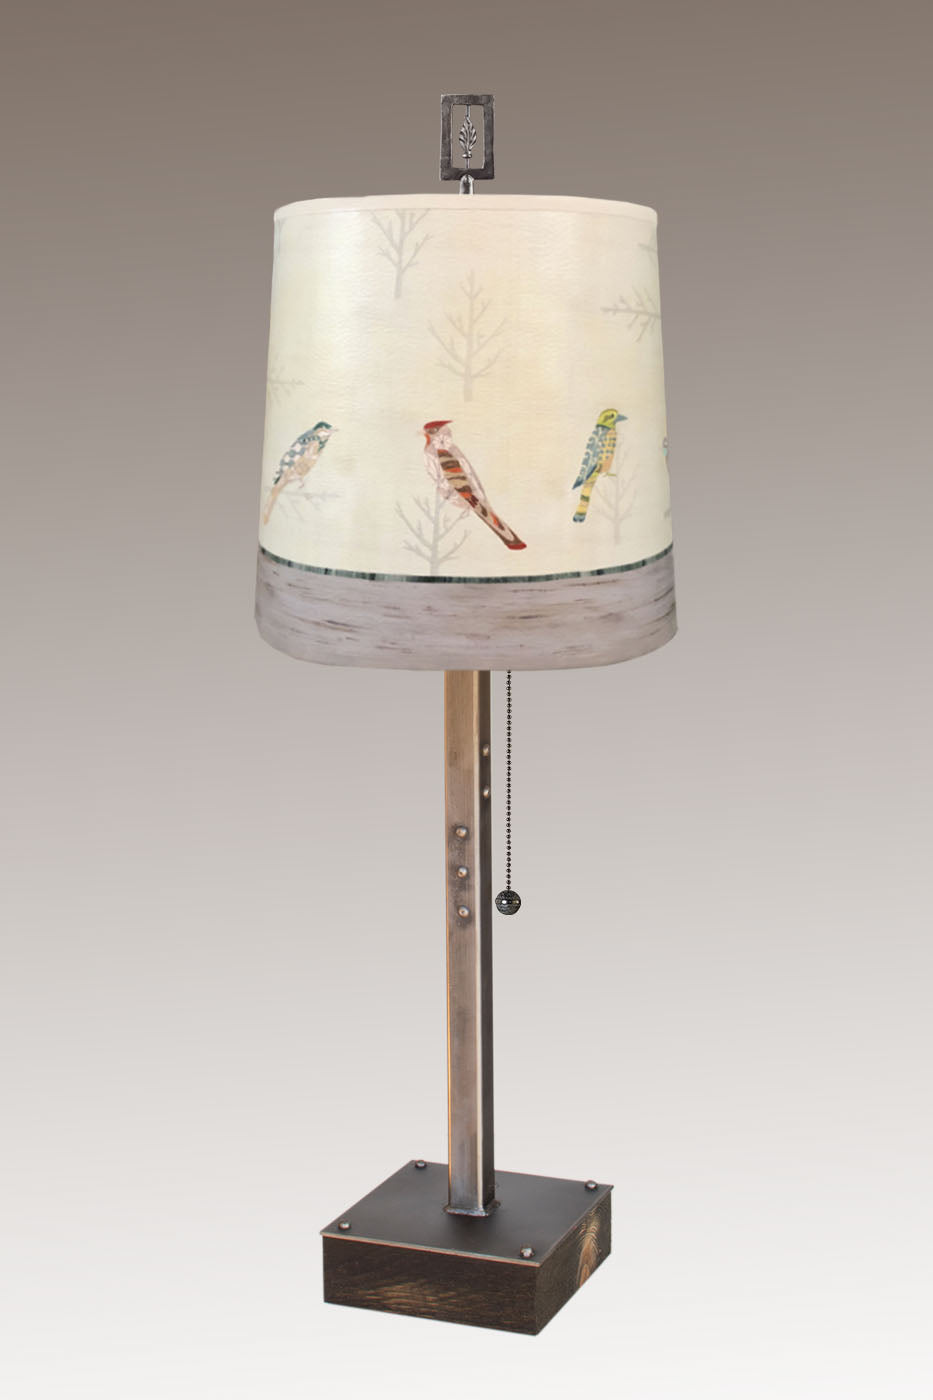 Steel Table Lamp on Wood with Medium Drum Shade in Bird Friends